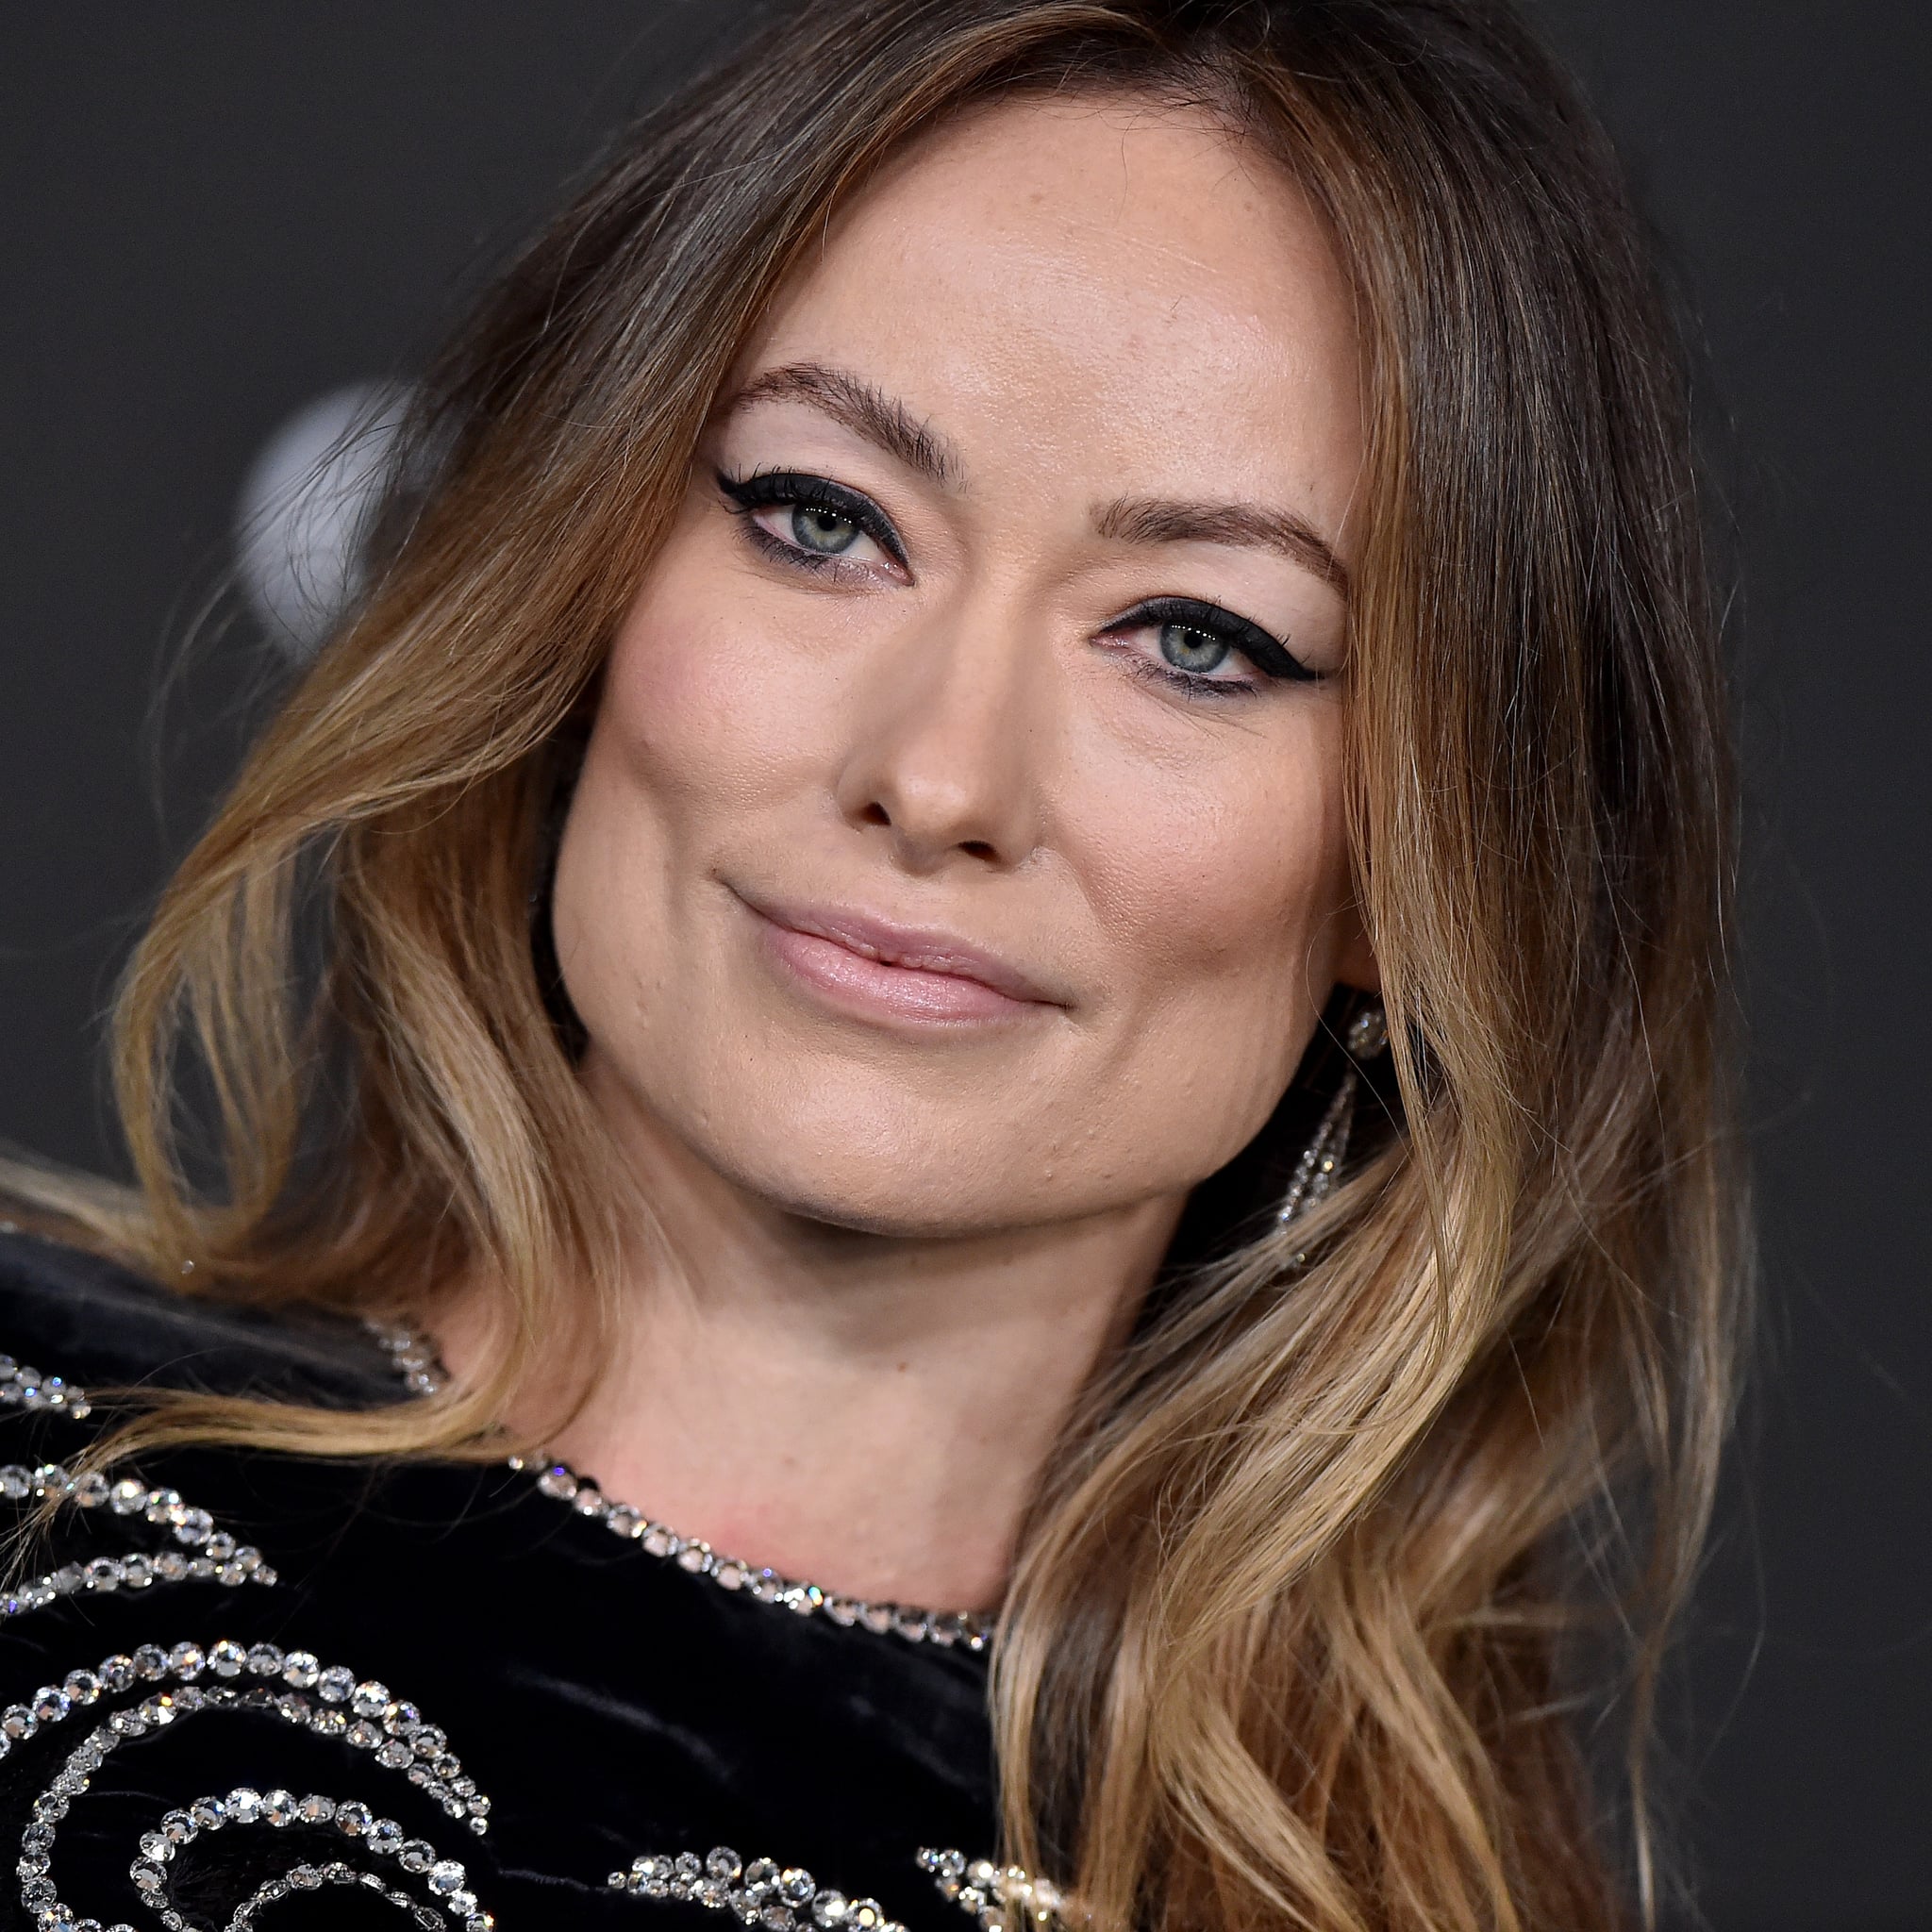 Olivia Wilde Shares A Rare Look At Her Butt Tattoo On Her 39th Birthday   First Curiosity